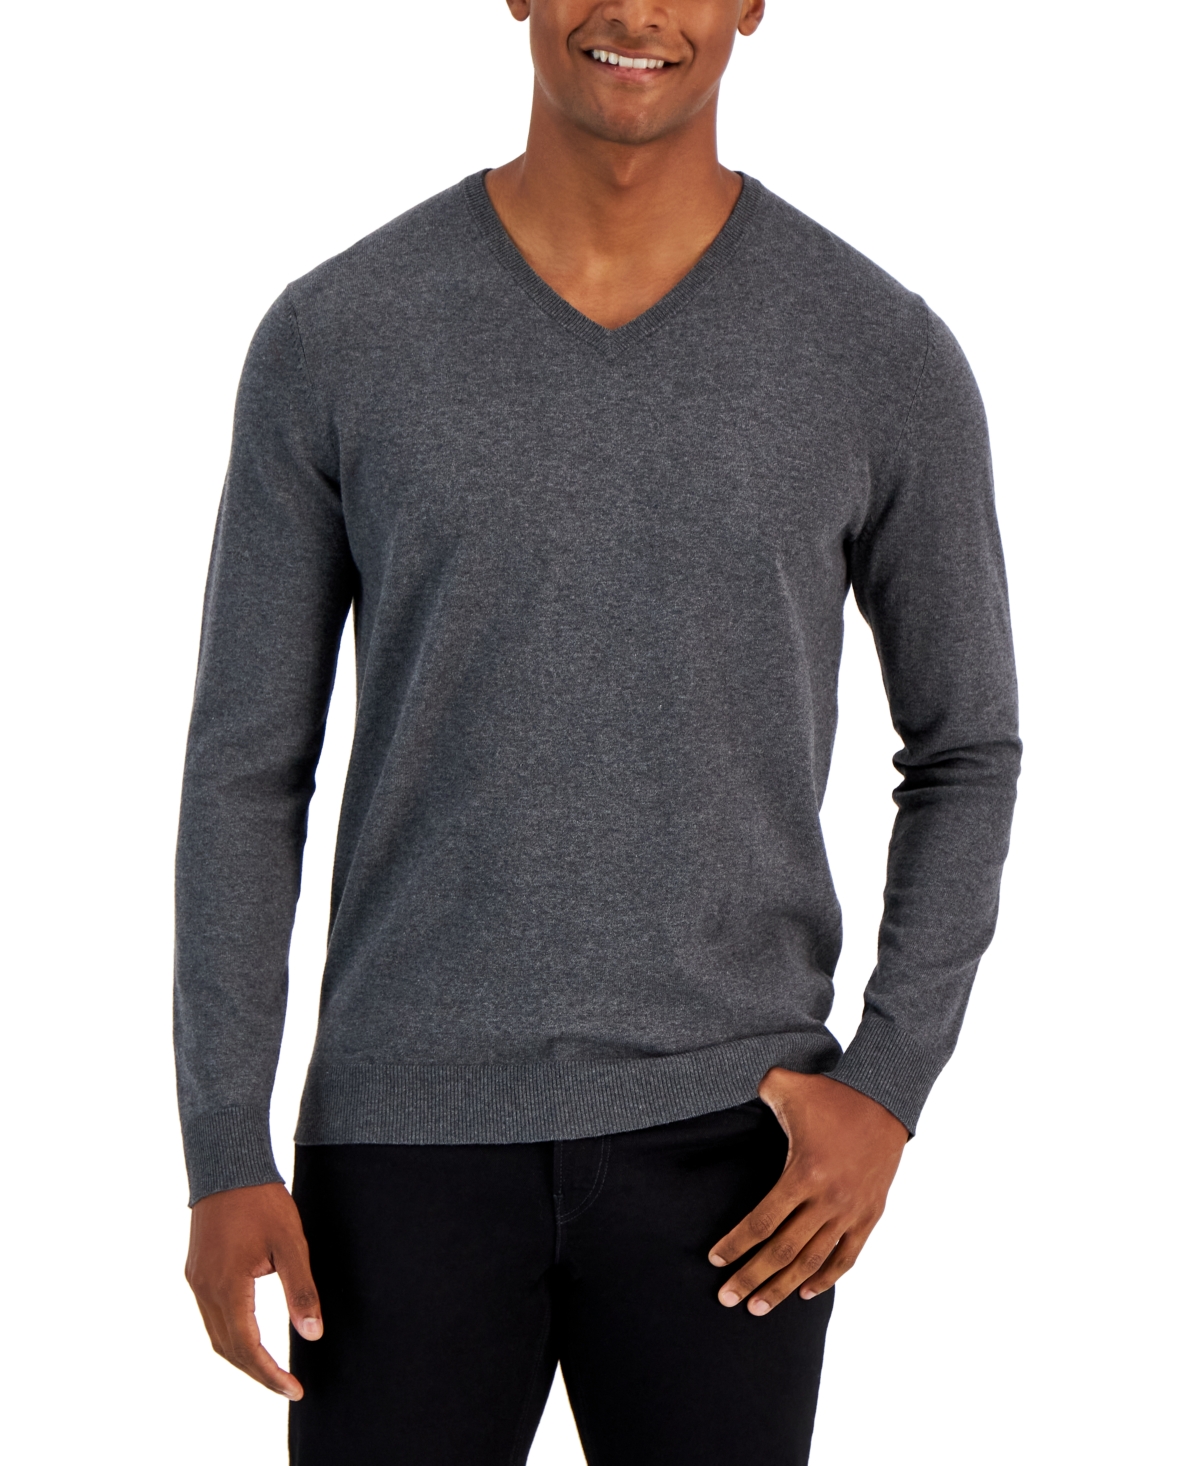 Men's Solid V-Neck Cotton Sweater, Created for Macy's - Twill Heather